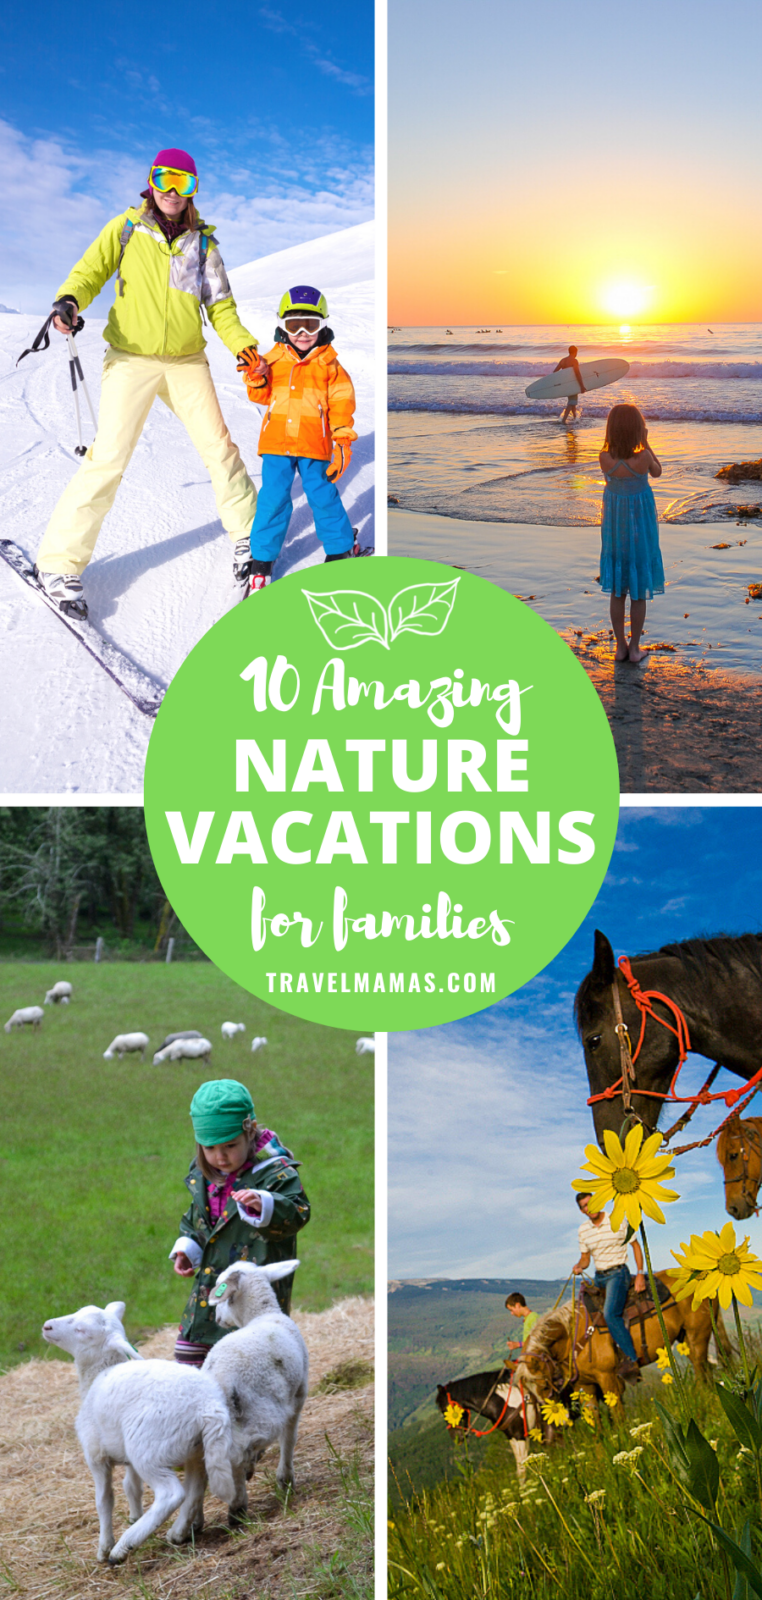 Amazing Nature Vacations for Families